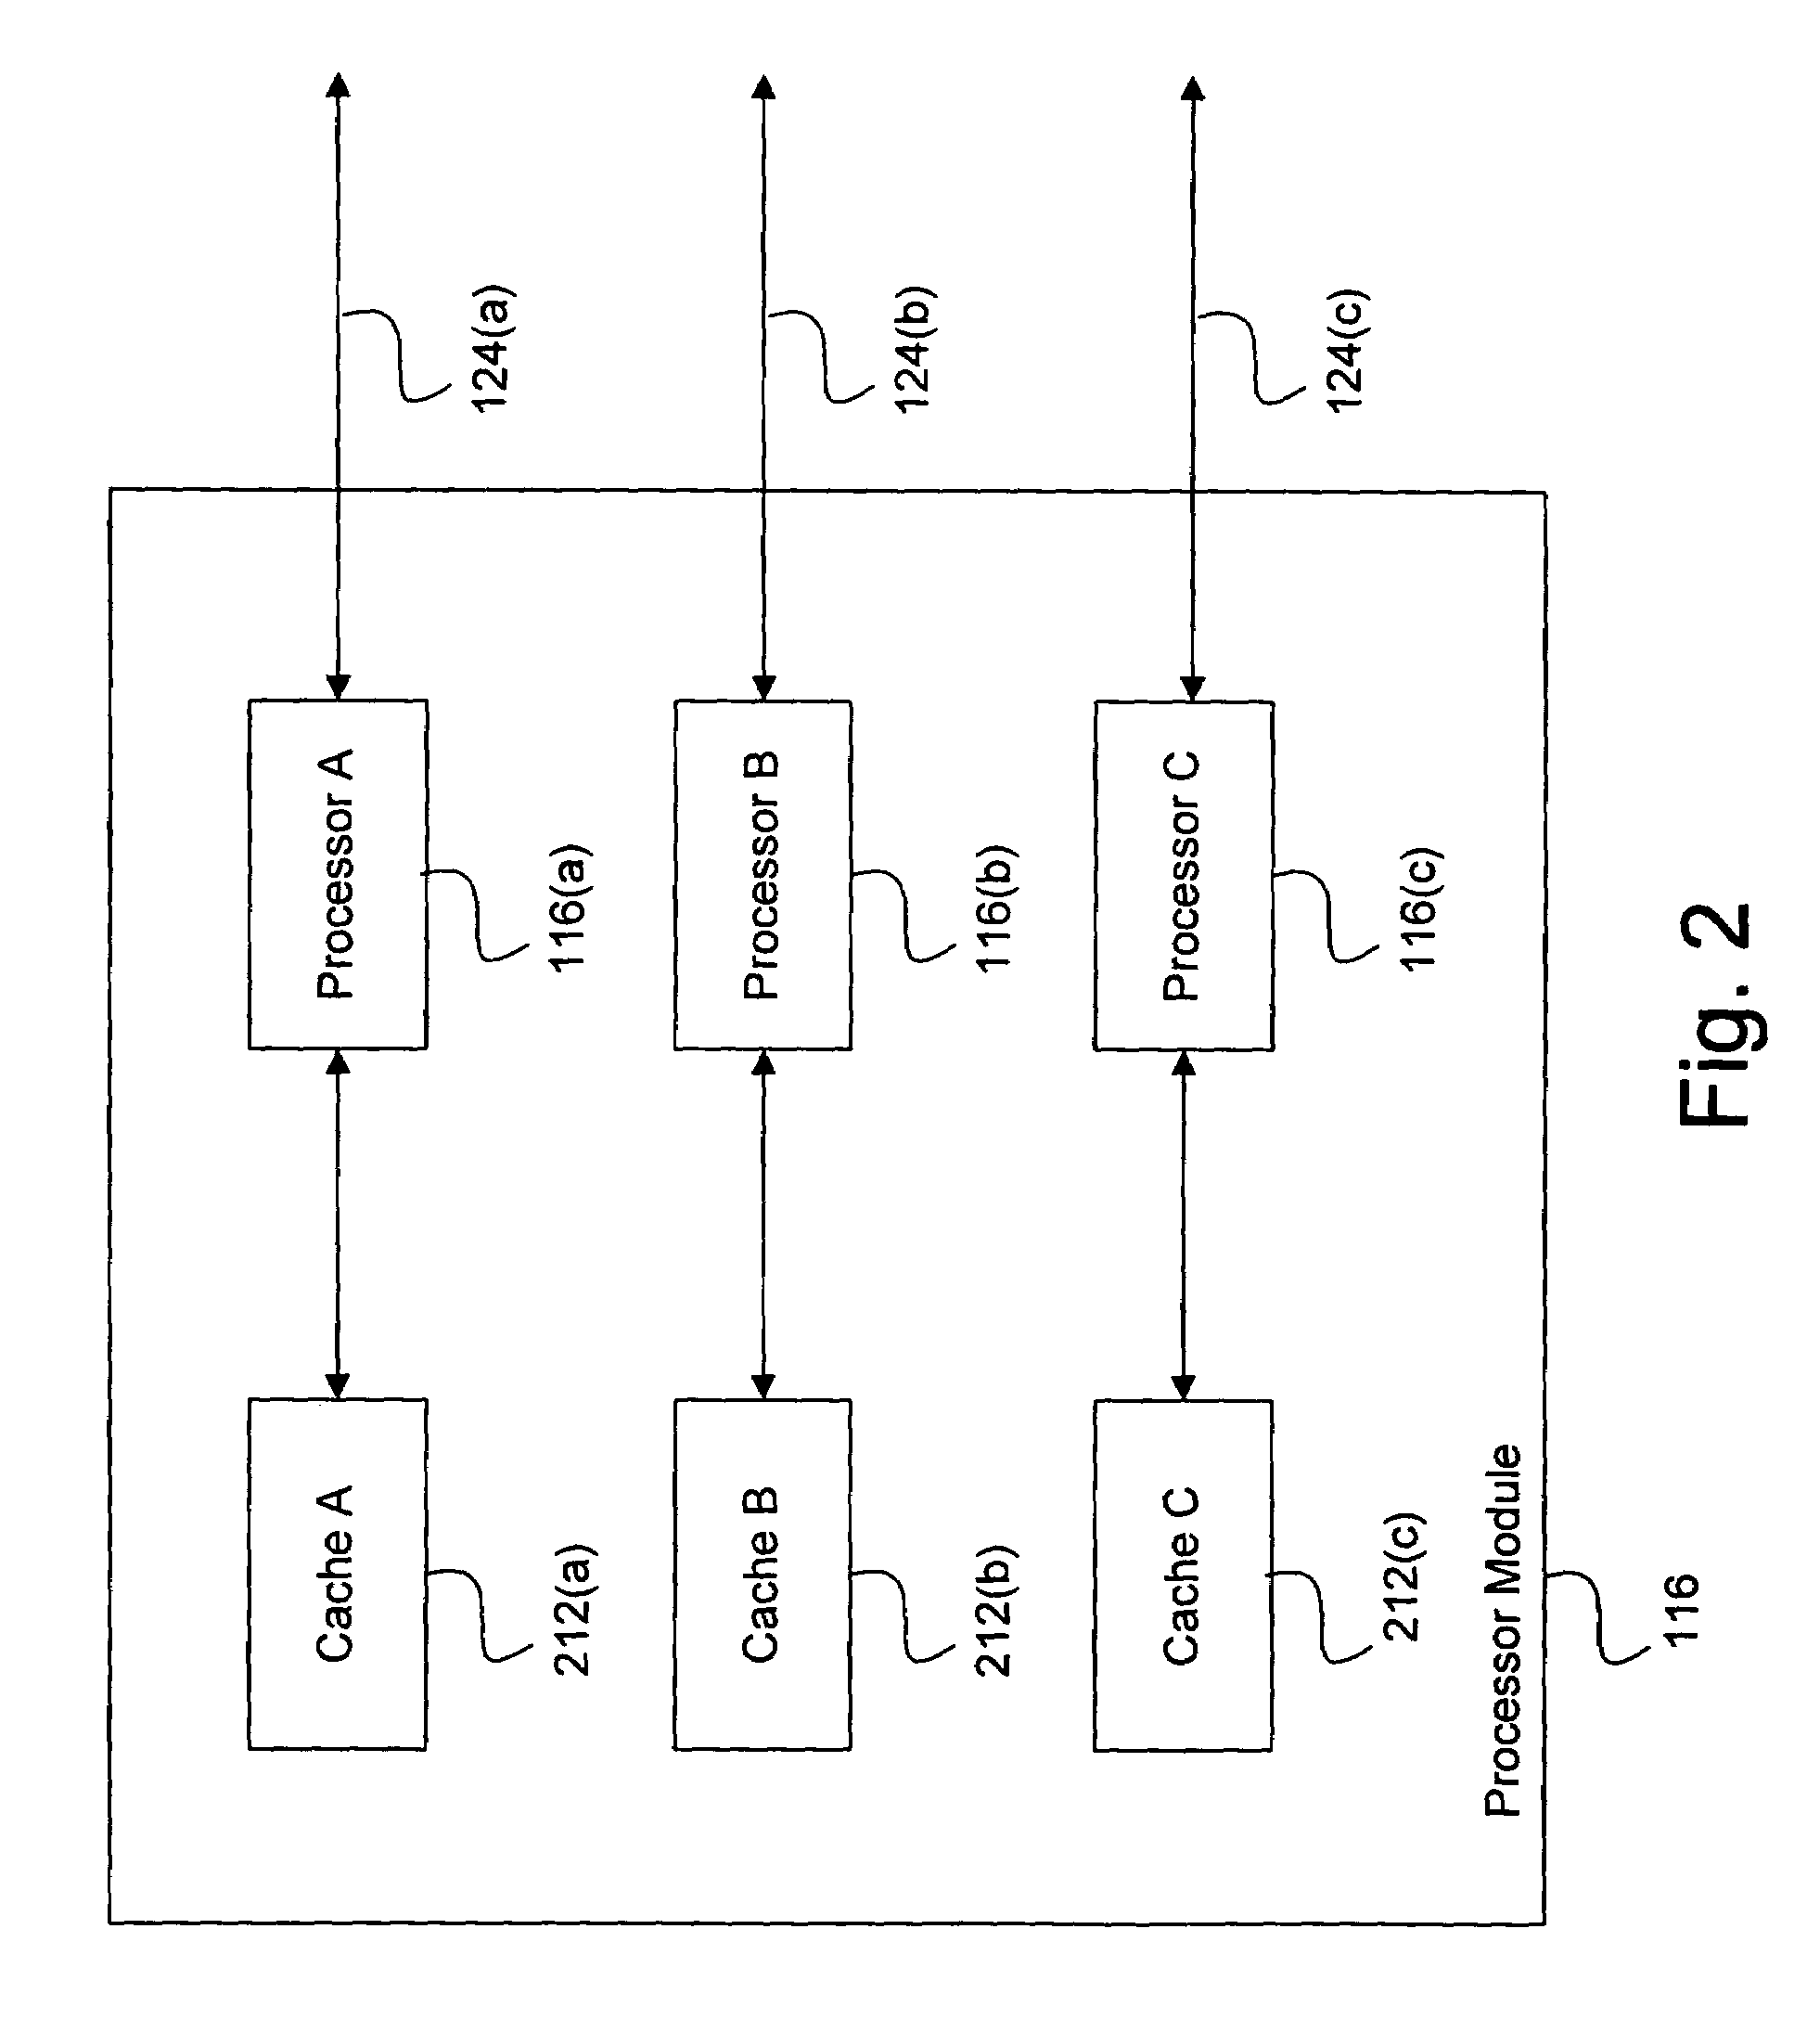 System and method for effectively implementing an immunity mode in an electronic device